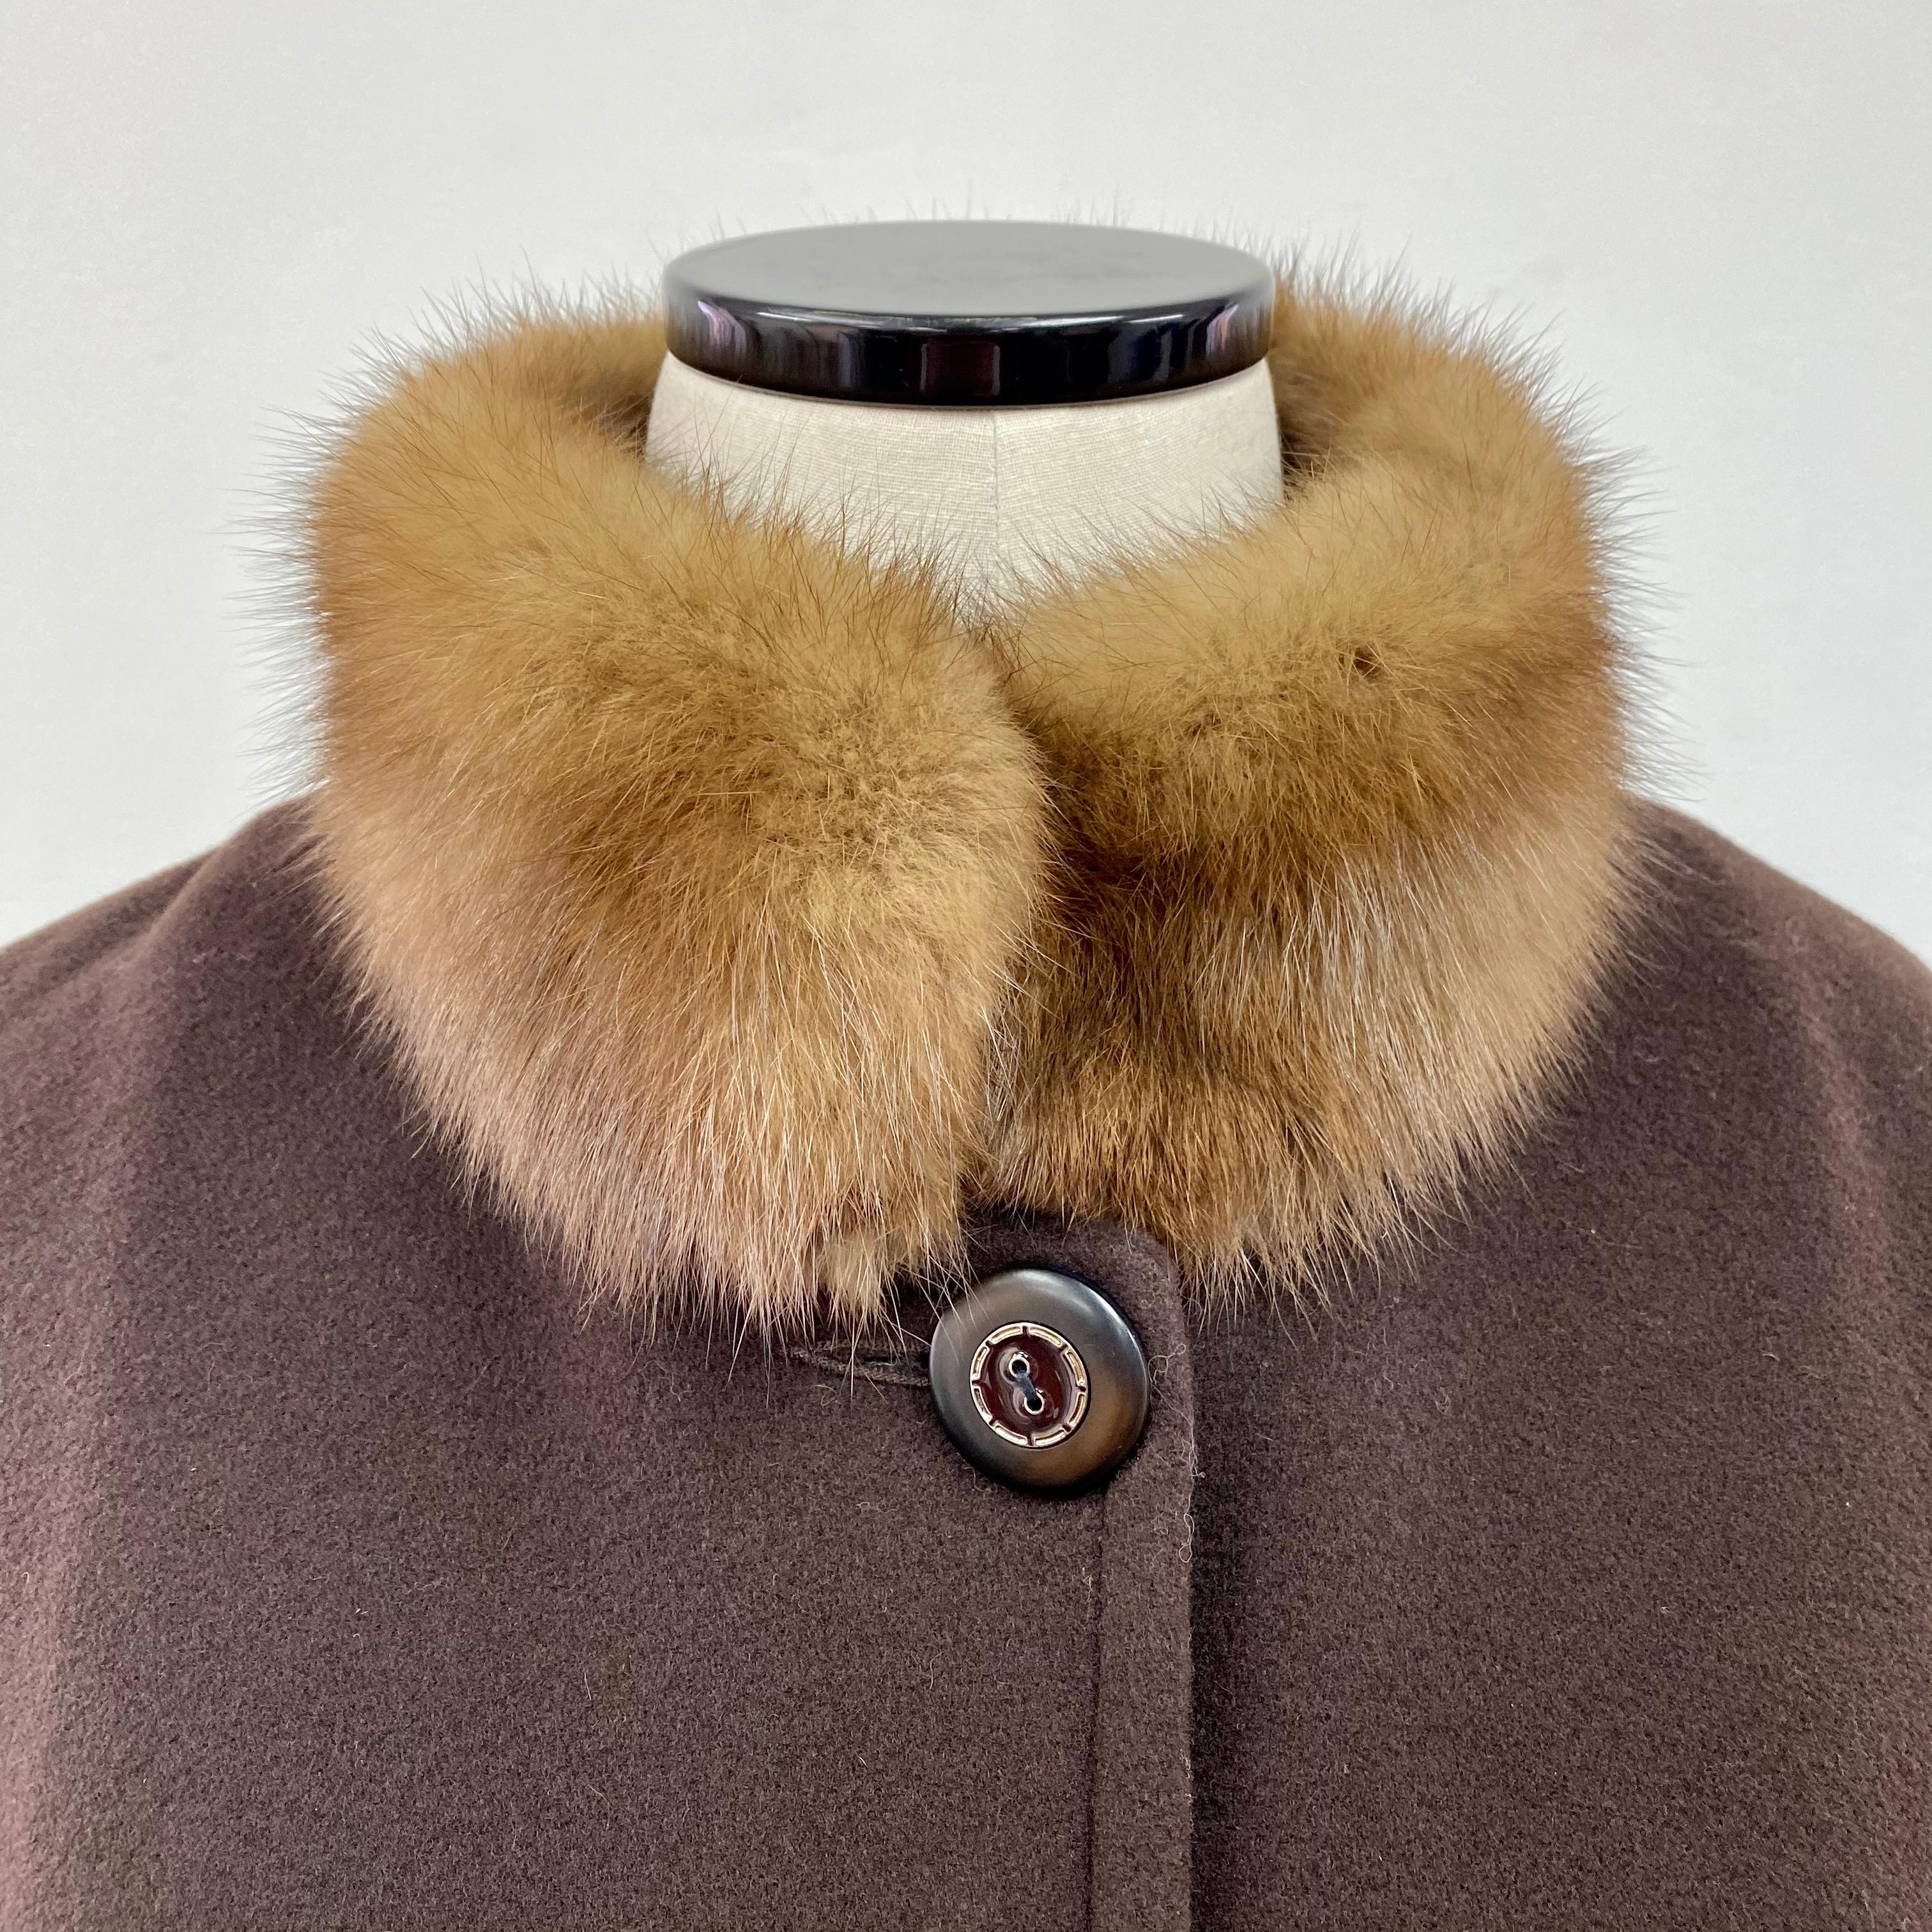 PRODUCT DESCRIPTION:

Brand New glamorous Birger Christensen wool cape with luxurious sable fur collar trim

Condition: Like New

Closure: Two front buttons

Color: Brown and Sable

Material: Cashmere blend and sable fur

Garment type: Cape